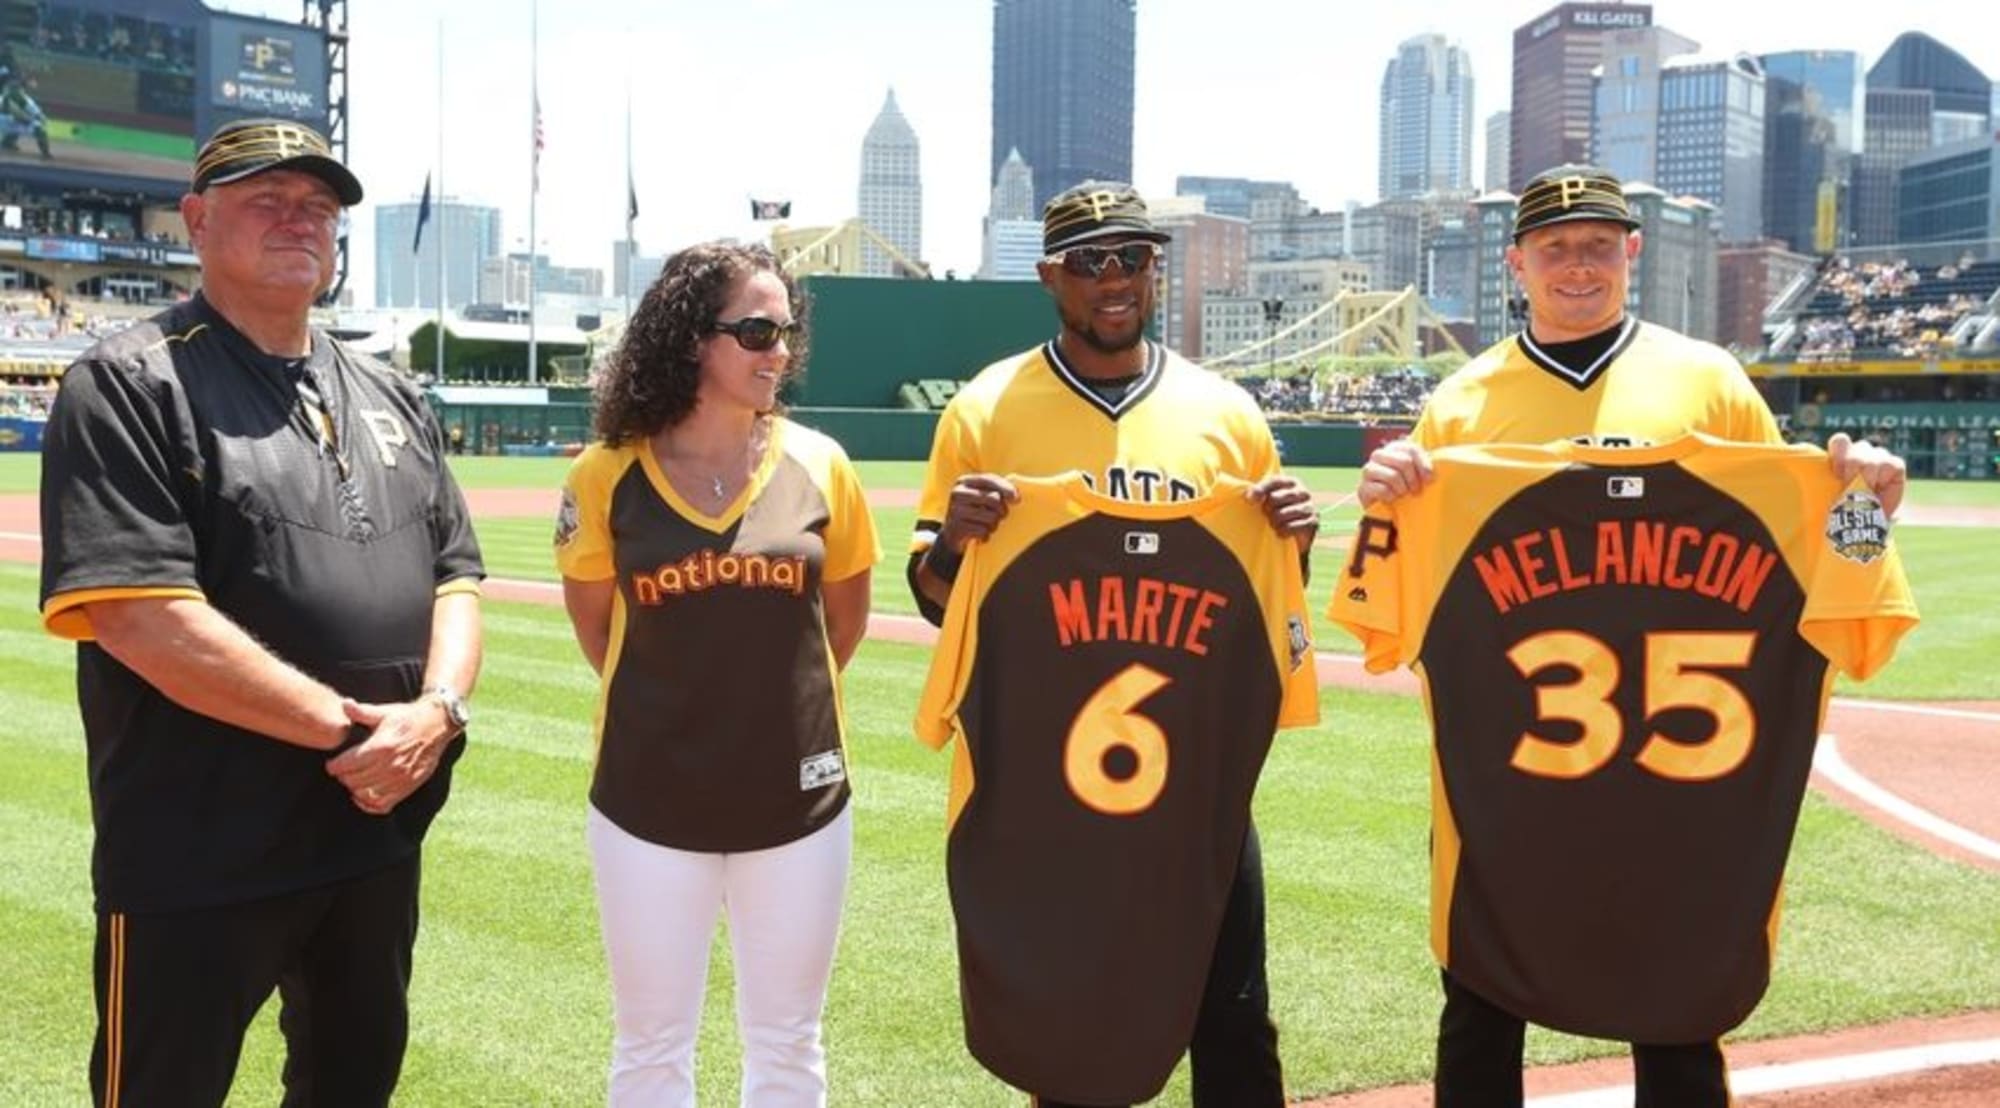 pirates all star jersey